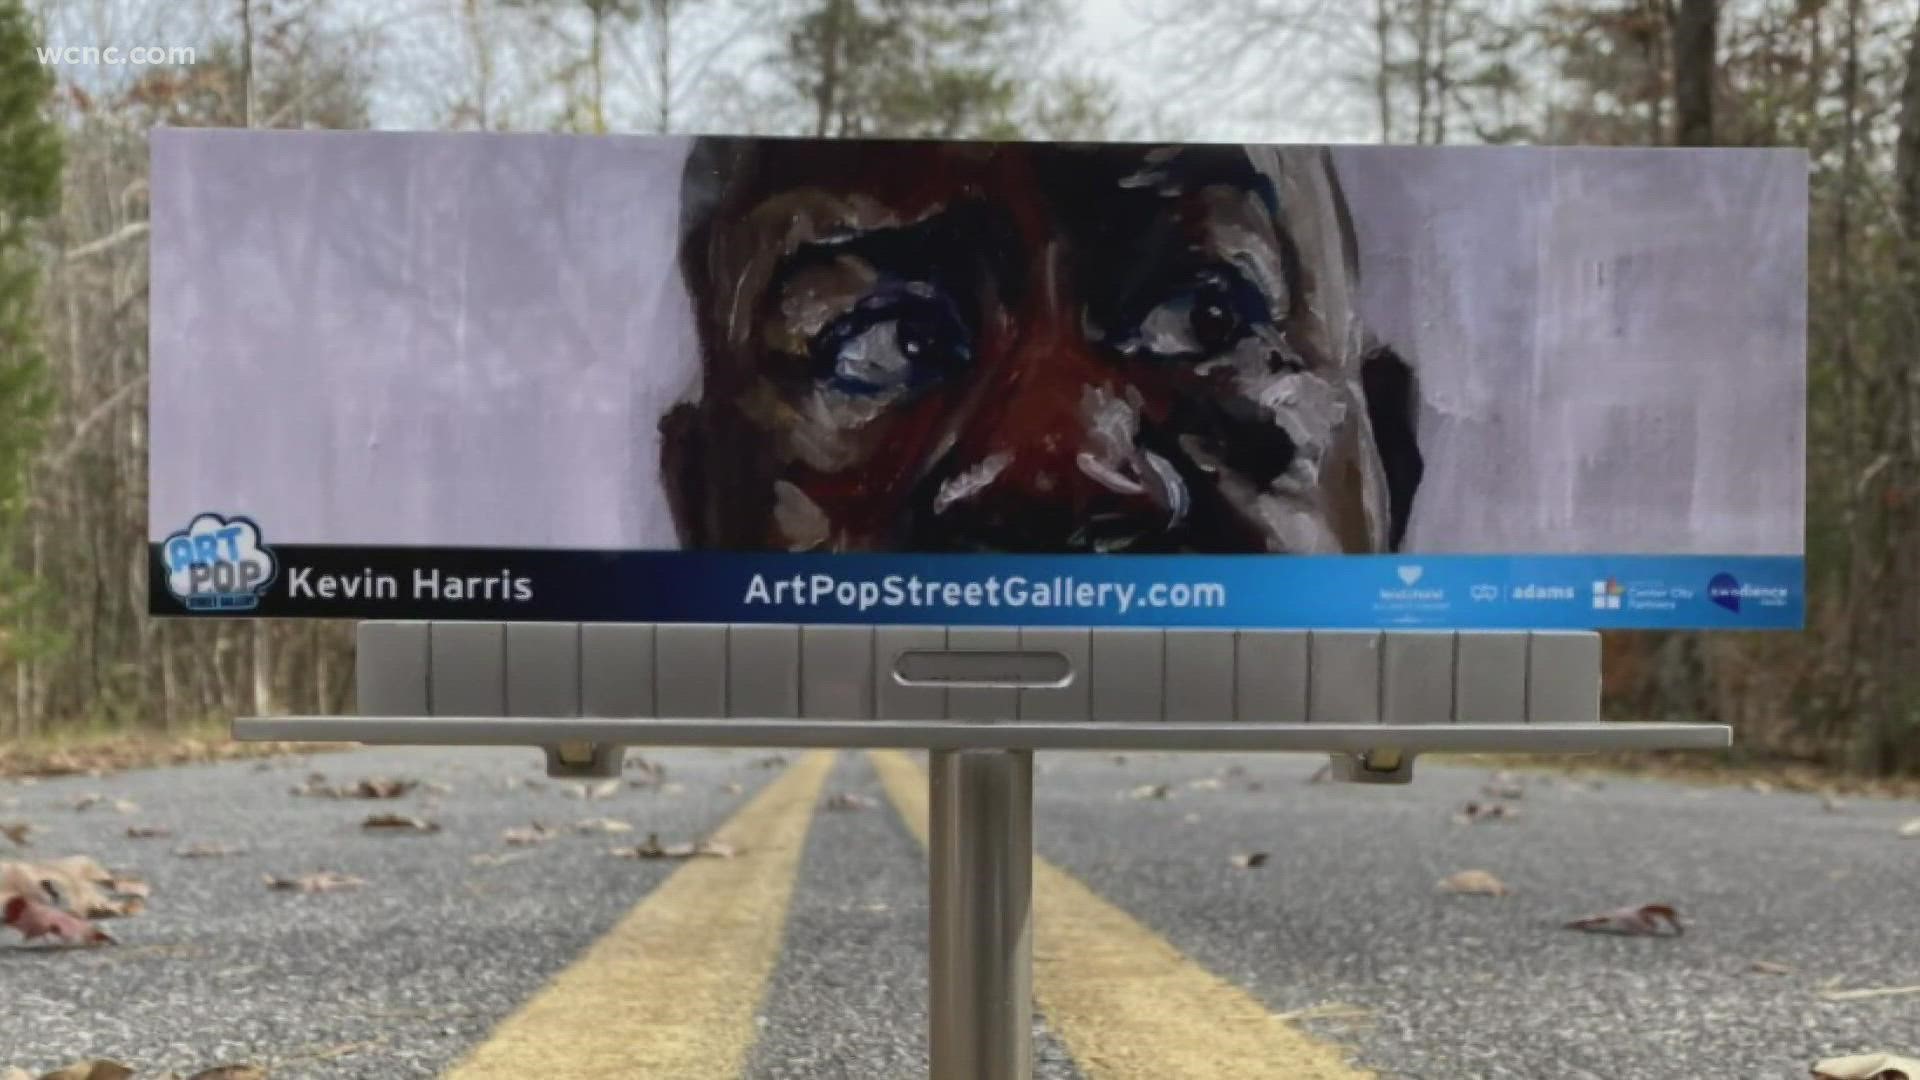 The art comes from local artists selected by ArtPop Street Gallery, a nonprofit that allows those creators to showcase their work in the Charlotte region.